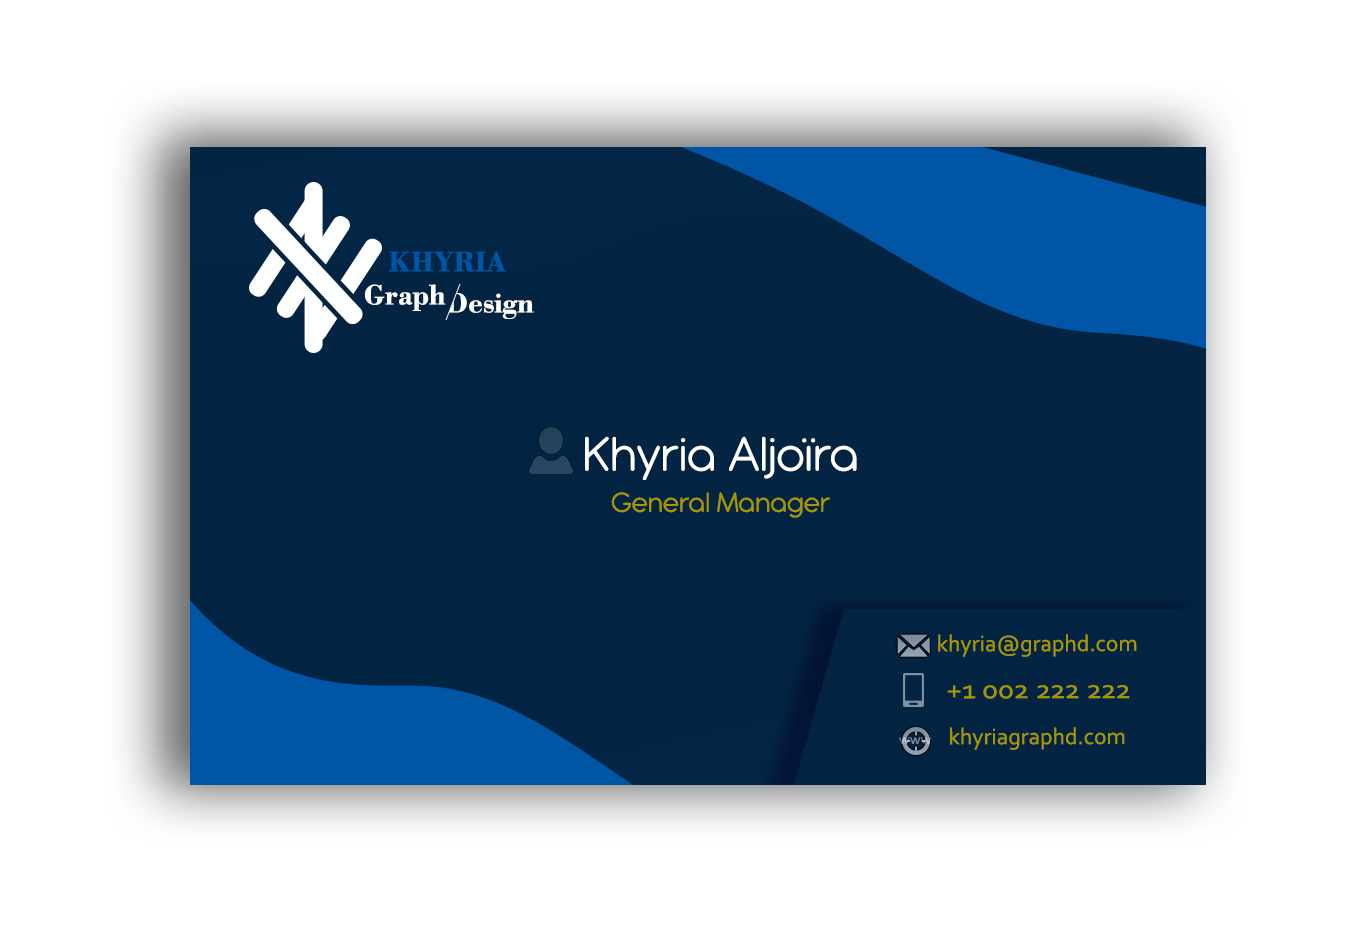 10916I can design professional business cards in less than 12 hours